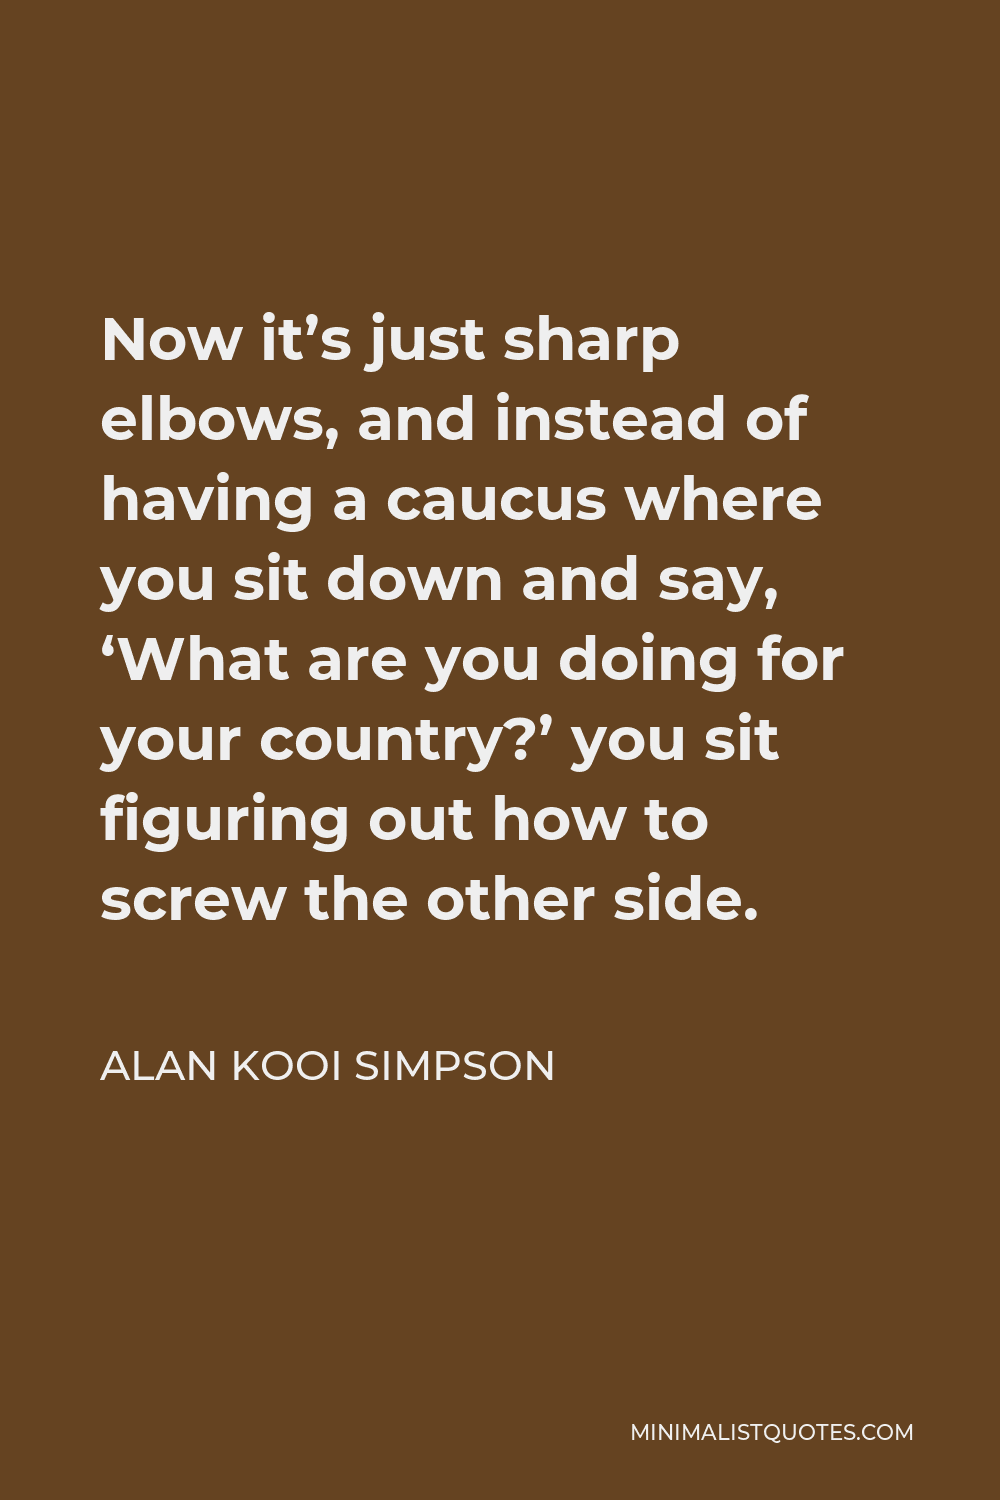 Alan Kooi Simpson Quote - Now it’s just sharp elbows, and instead of having a caucus where you sit down and say, ‘What are you doing for your country?’ you sit figuring out how to screw the other side.